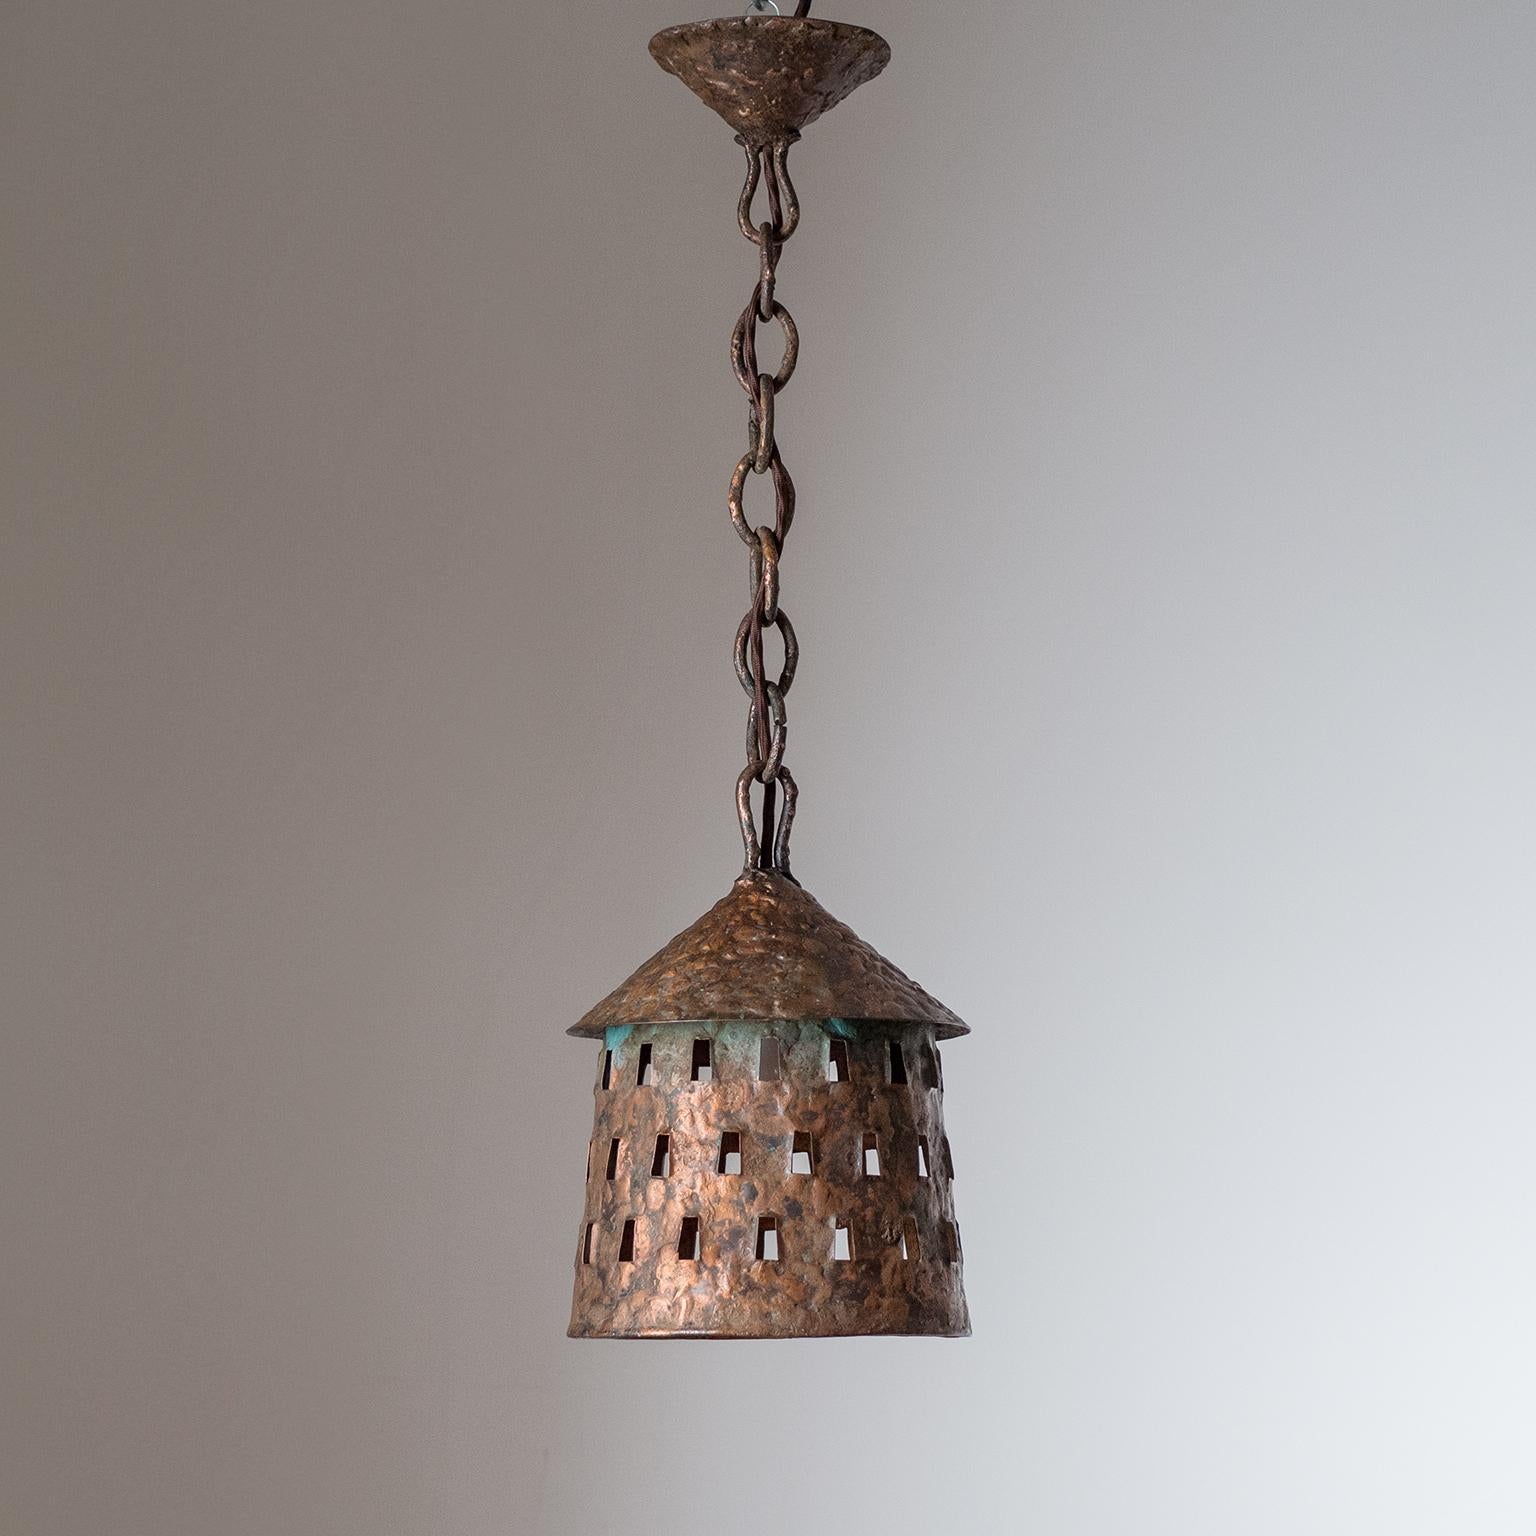 Rare primitive or Brutalist copper lanterns/pendants, circa 1970. Very rough and coarse surface with a rich patina. Each light has a new E27 socket with new wiring. Priced and sold as a set of three.